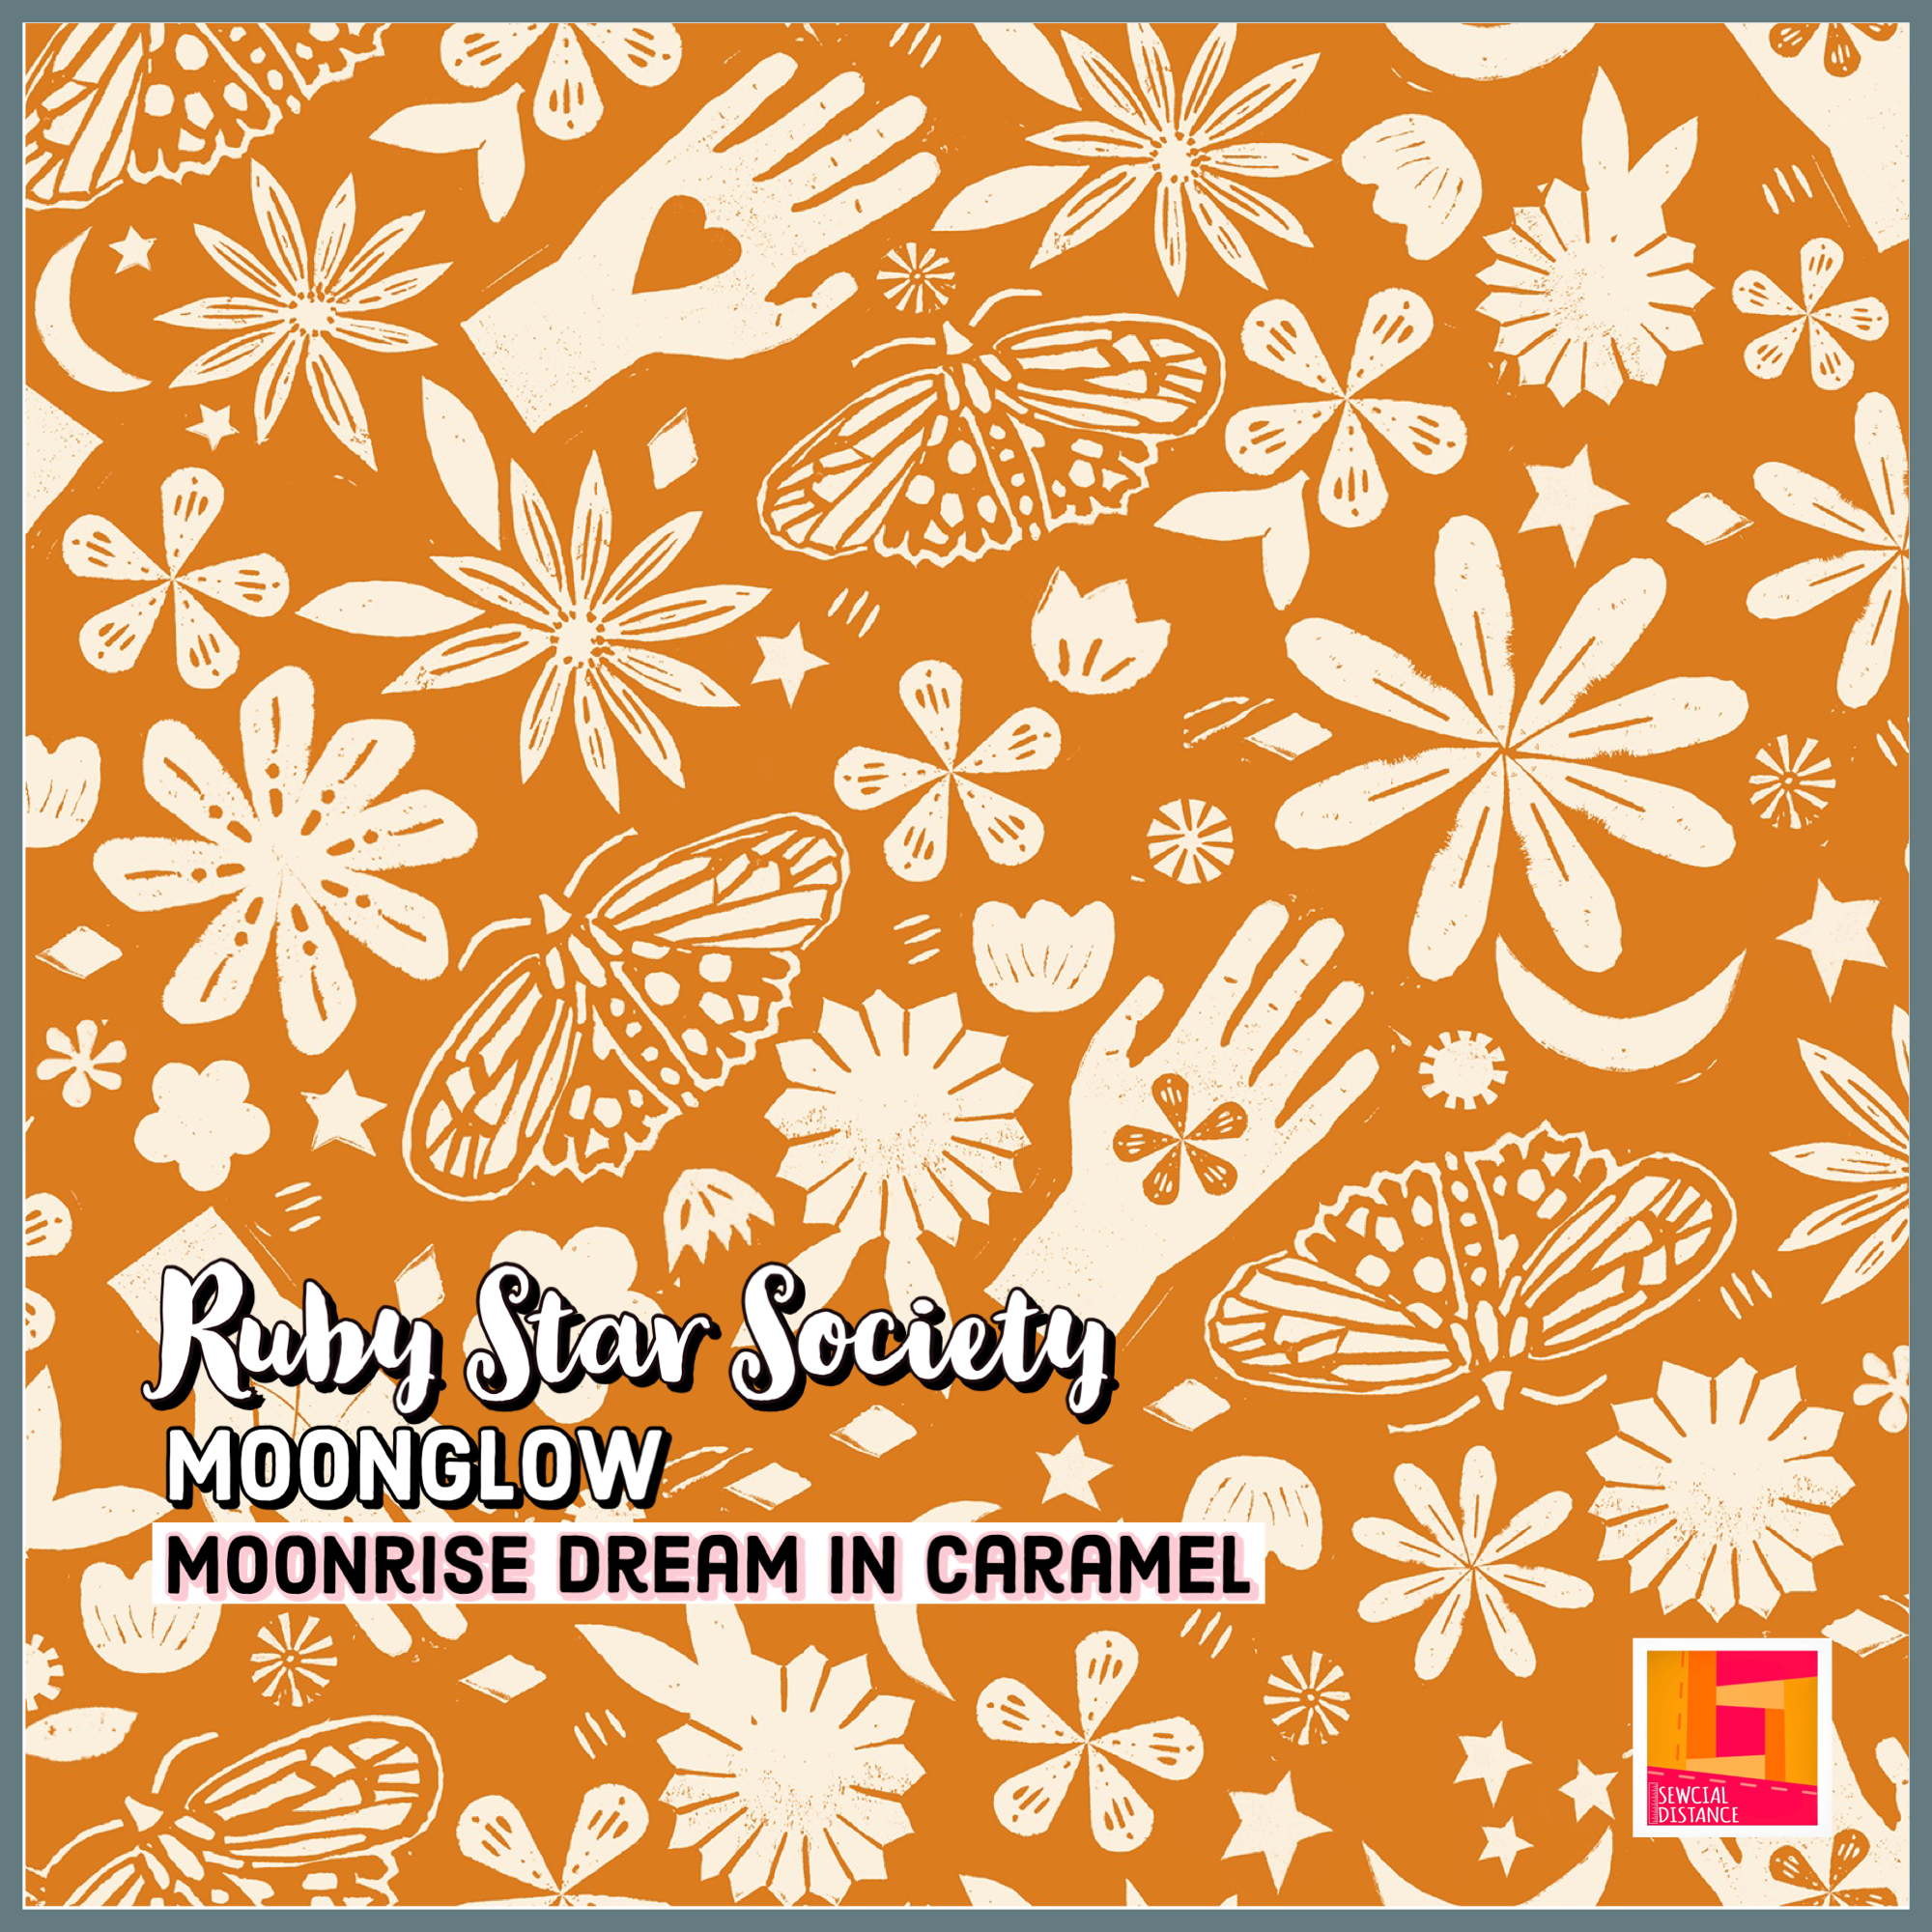 Ruby Star Society-Moonglow-Moonrise Dream in Caramel